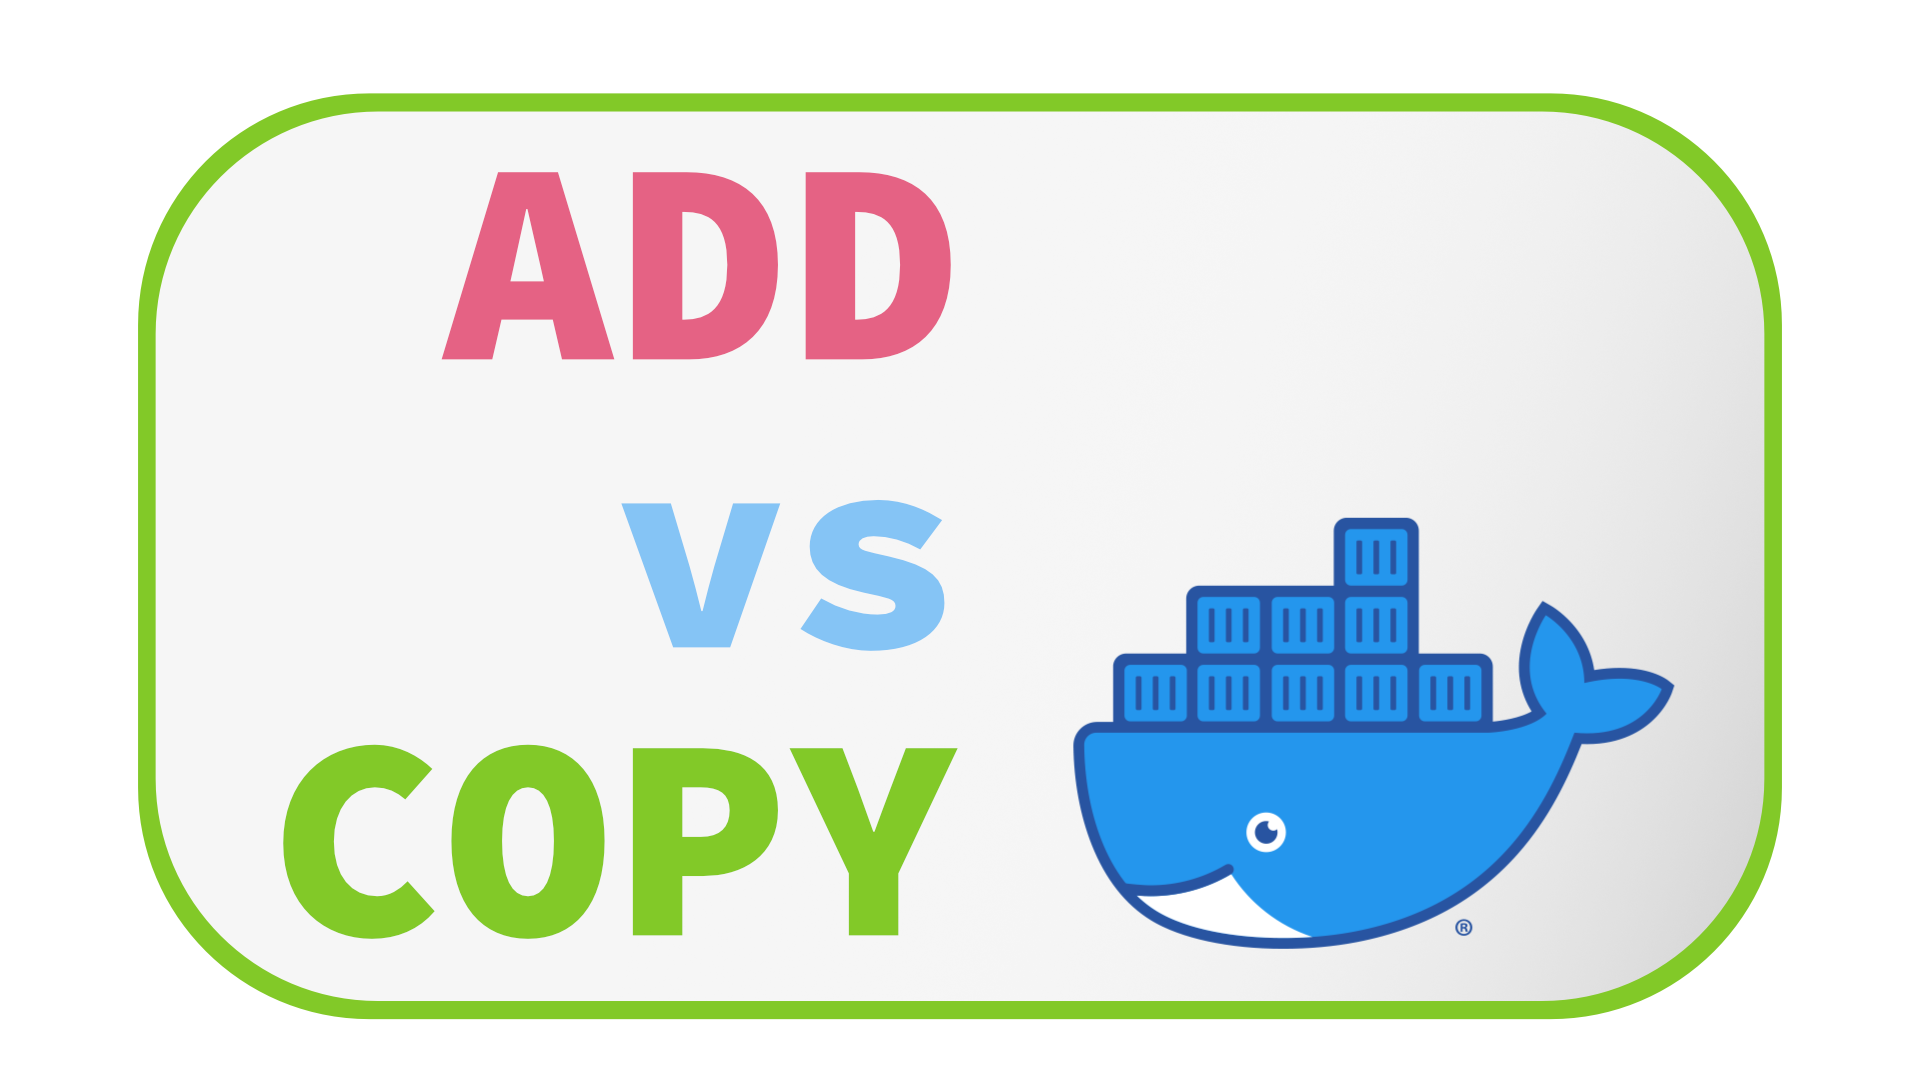 Shall I Use ADD or COPY in the Dockerfile What #39 s the Difference?